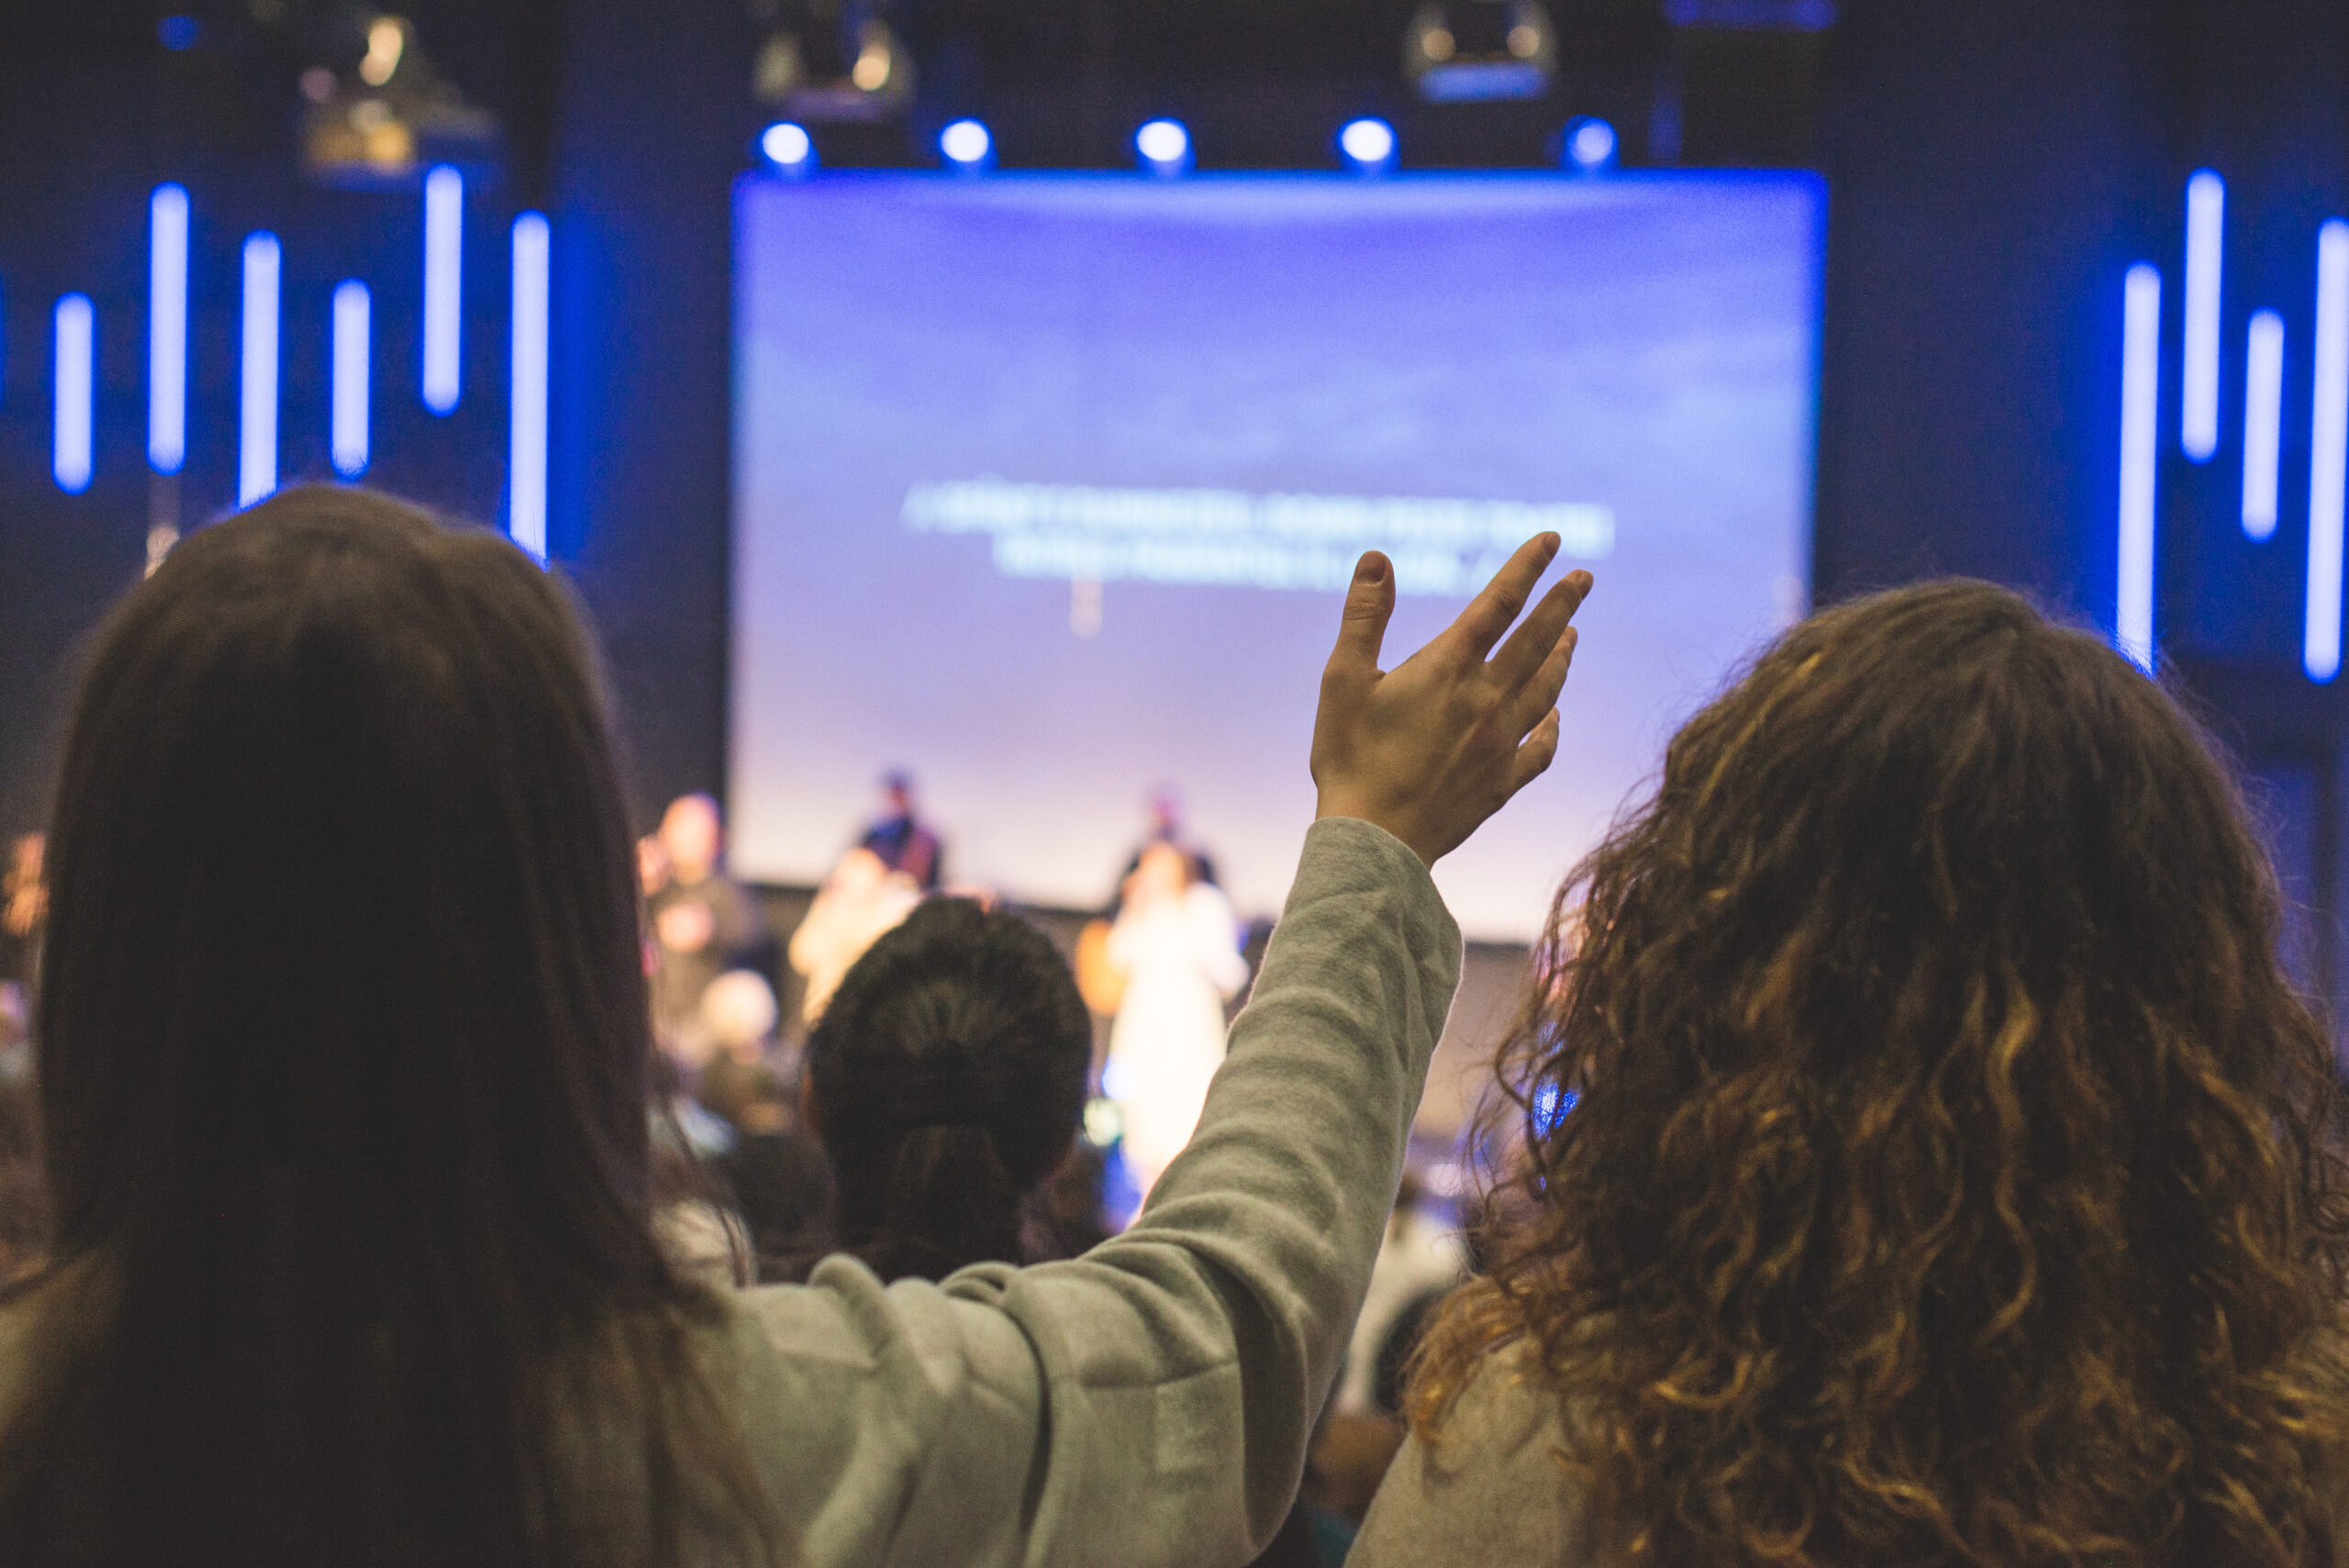 Christian worship with hands lifted